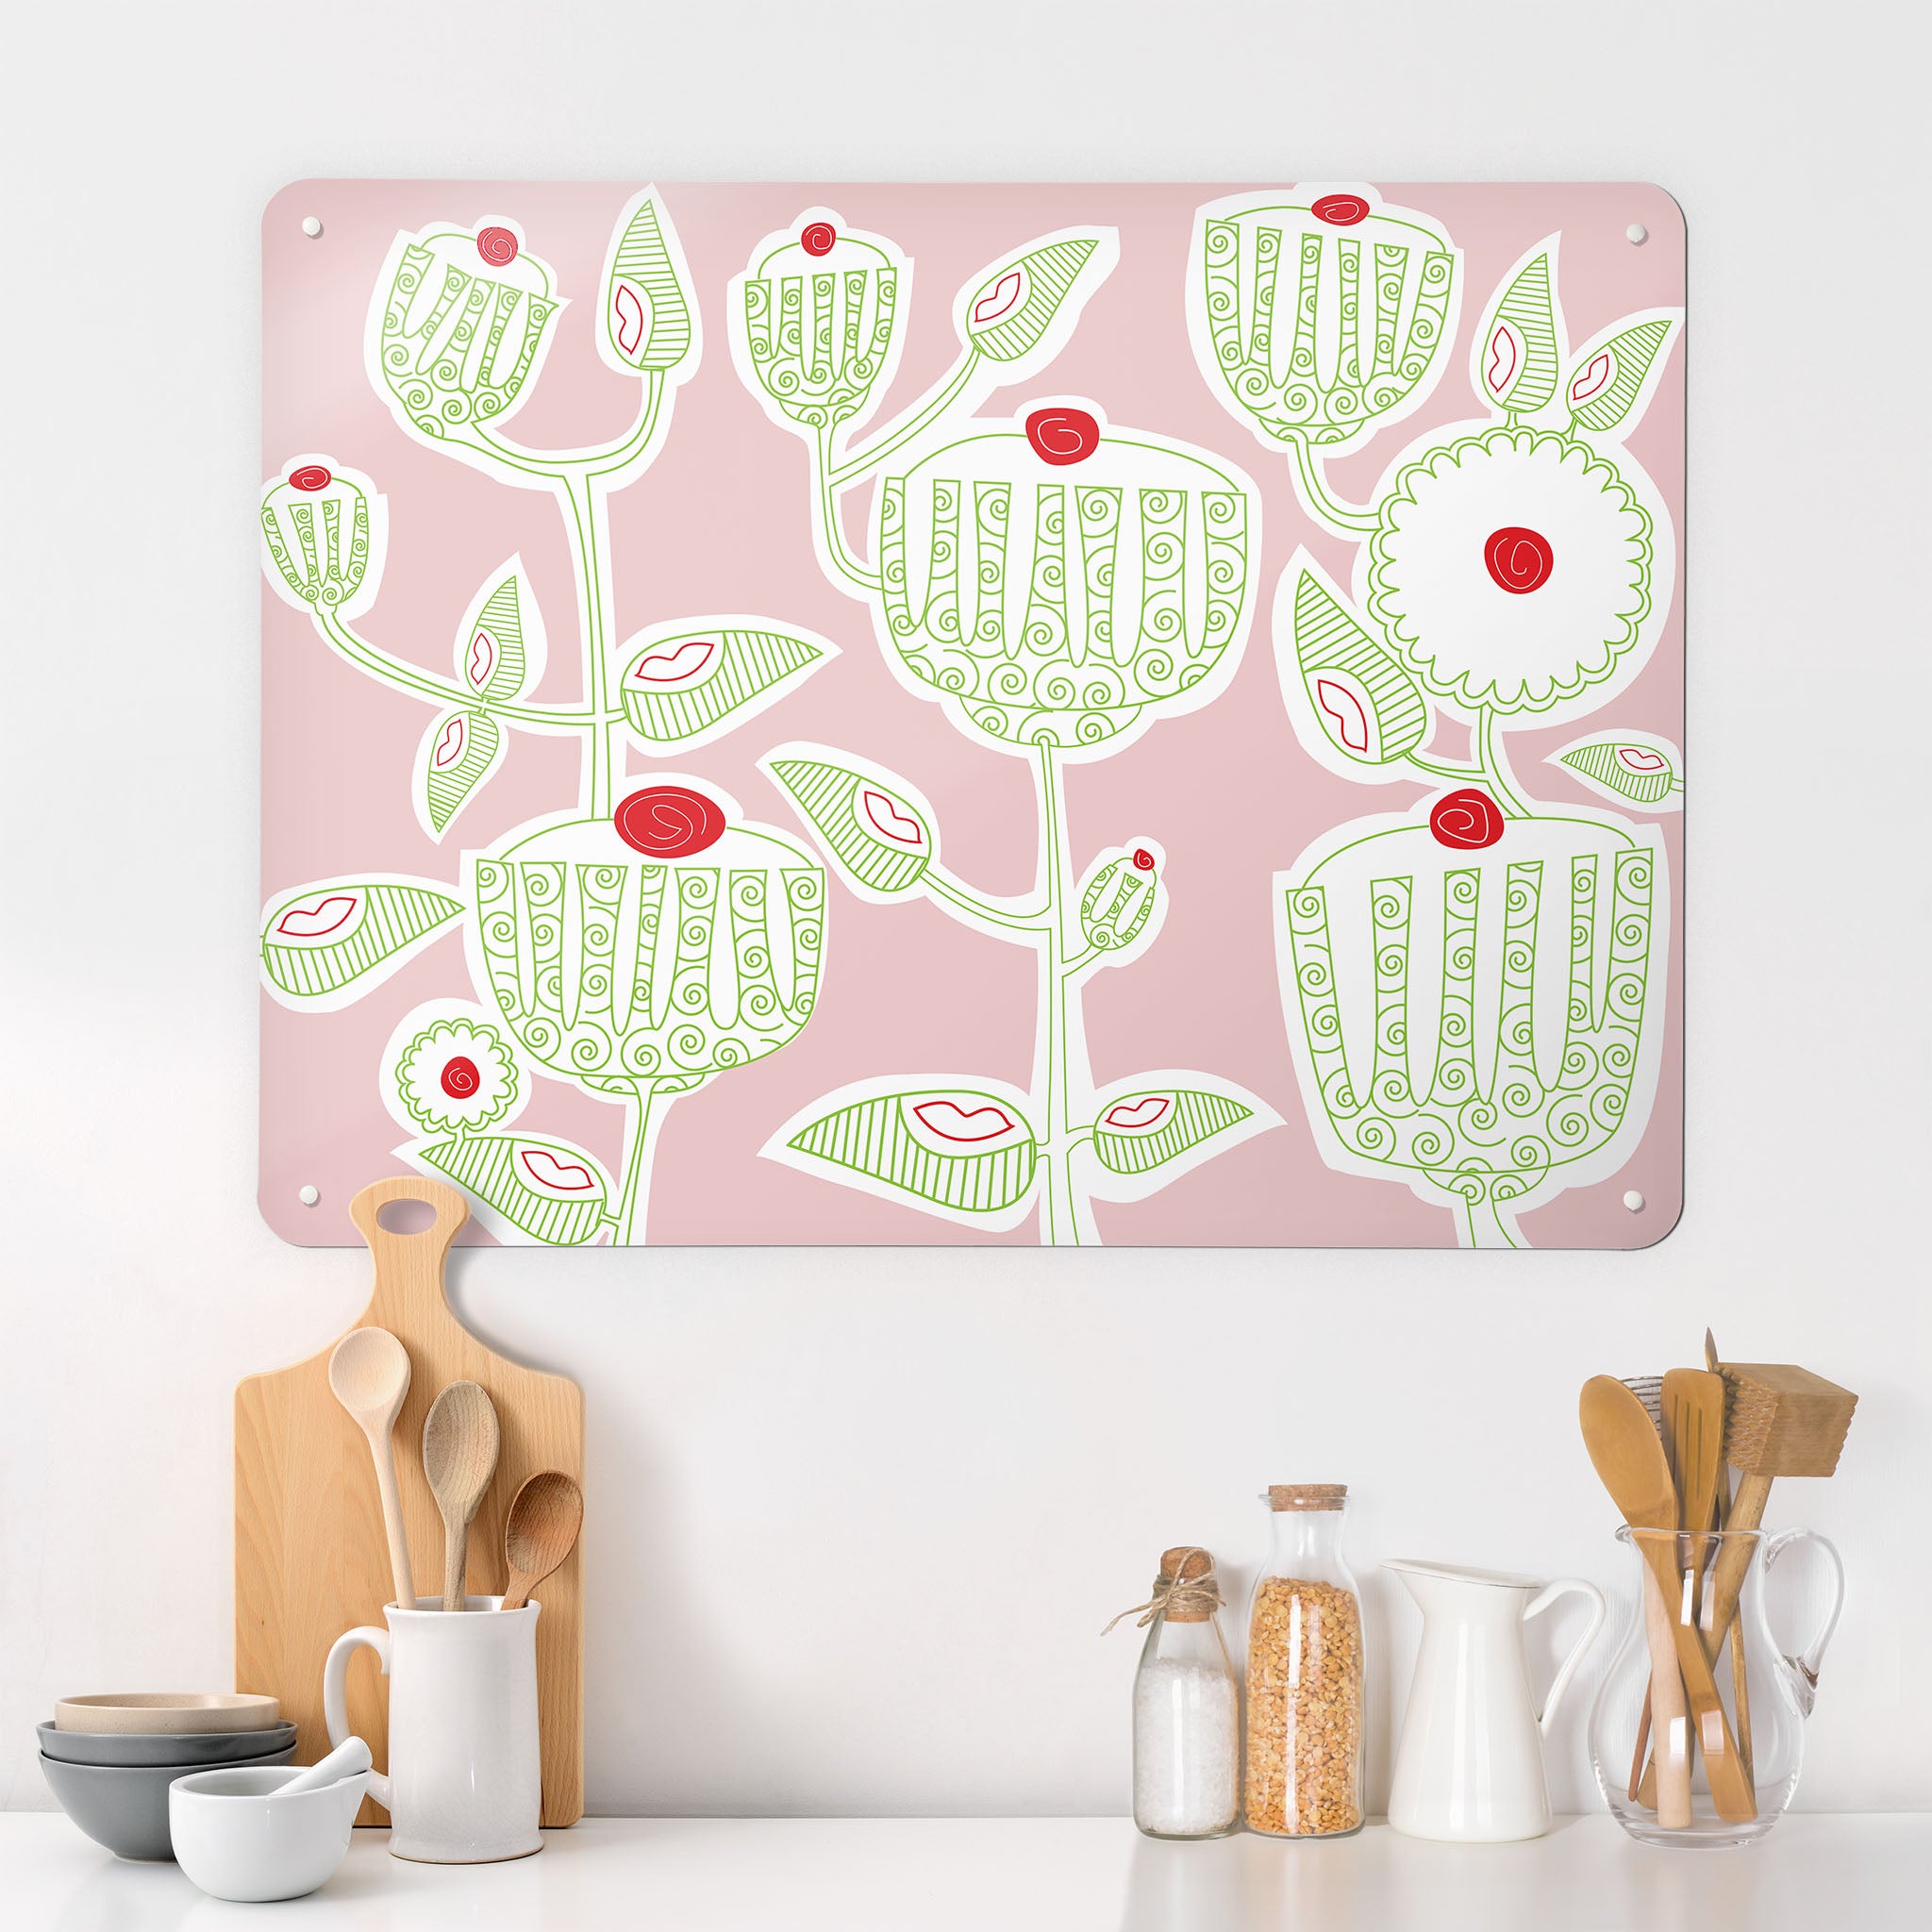 A kitchen interior with a magnetic metal wall art panel showing a cupcake plant design in green, red, white and pink